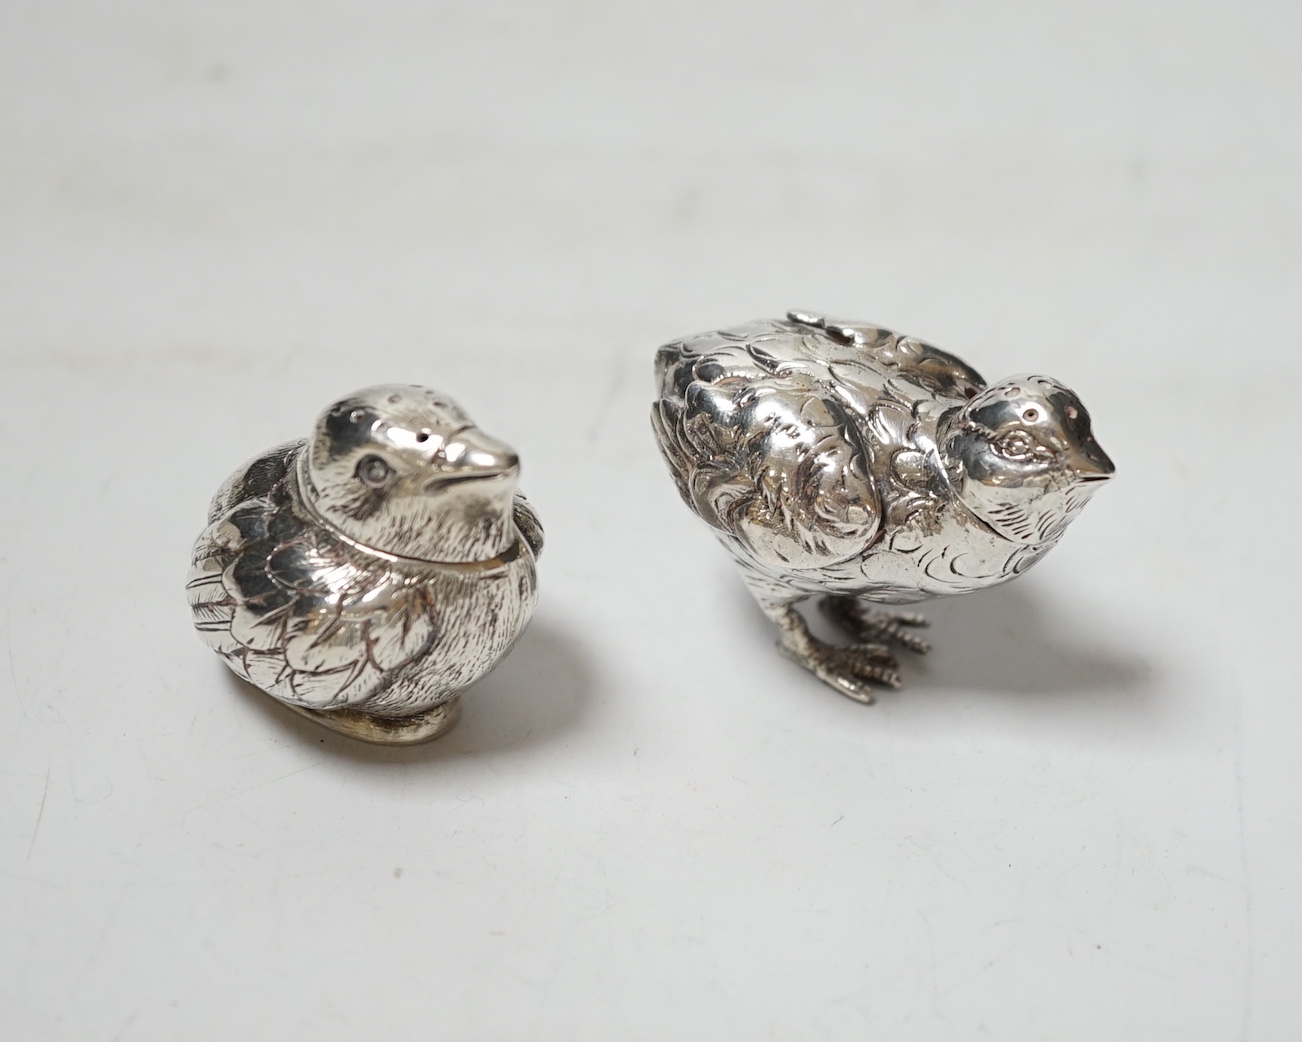 Two novelty silver pepperettes, modelled as chicks, the smallest with import marks for London, 1925, the other with import marks, but no date letter.